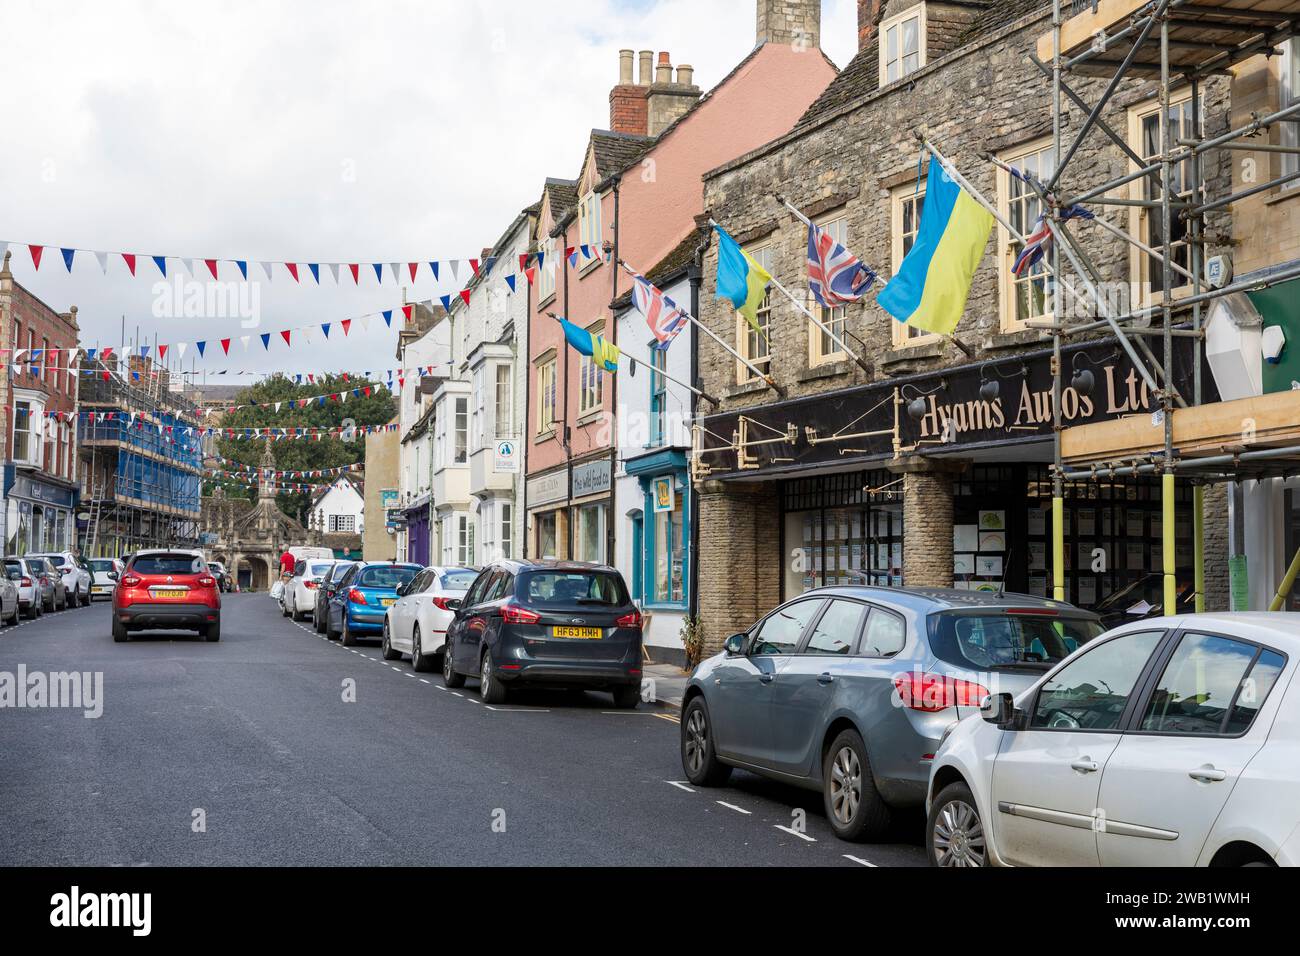 Malmesbury town centre, view along high street in this Wiltshire town, Ukraine flags flying alongside Union Jack flags,England,UK Stock Photo